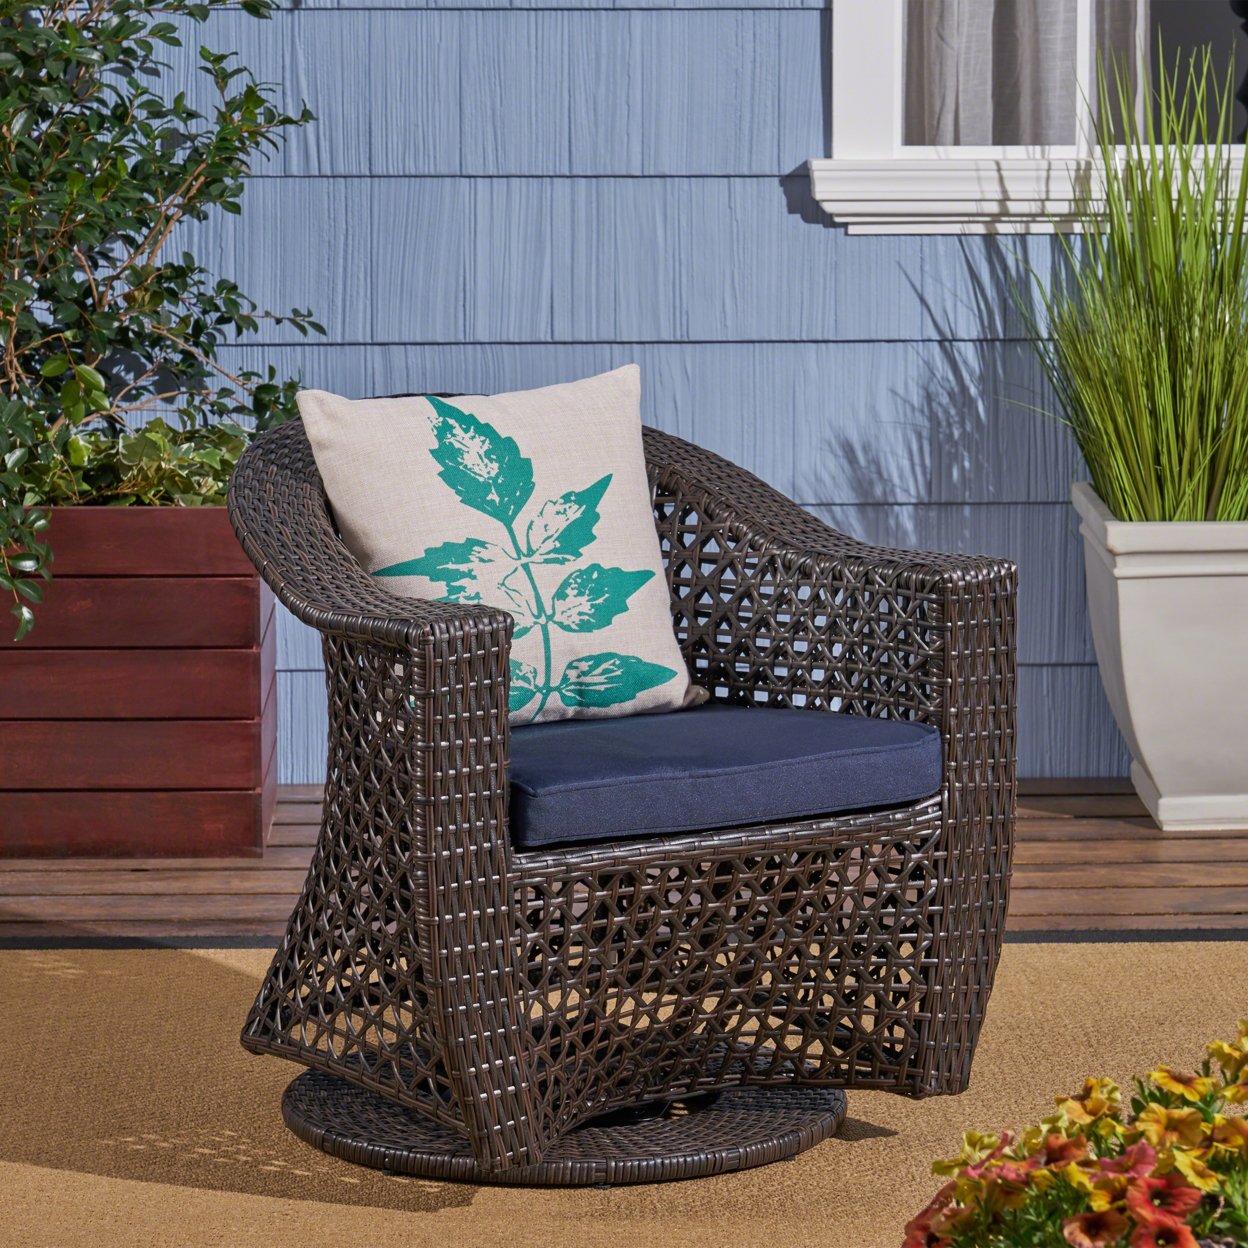 Big Sur Patio Swivel Chair, Wicker With Outdoor Cushions, Multi-Brown, Navy Blue - Single